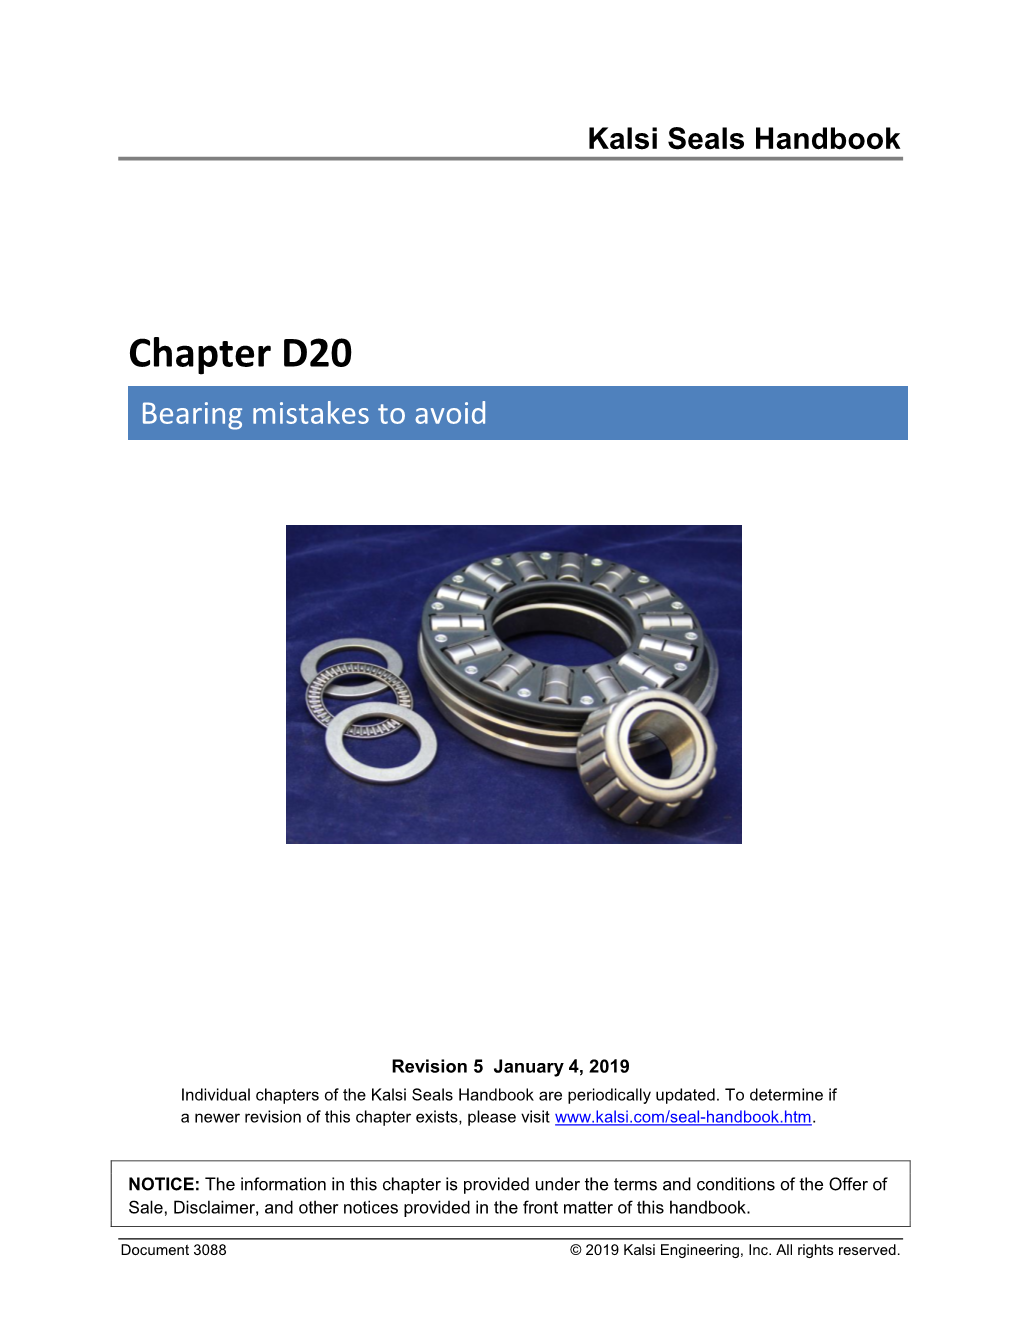 Chapter D20 Bearing Mistakes to Avoid